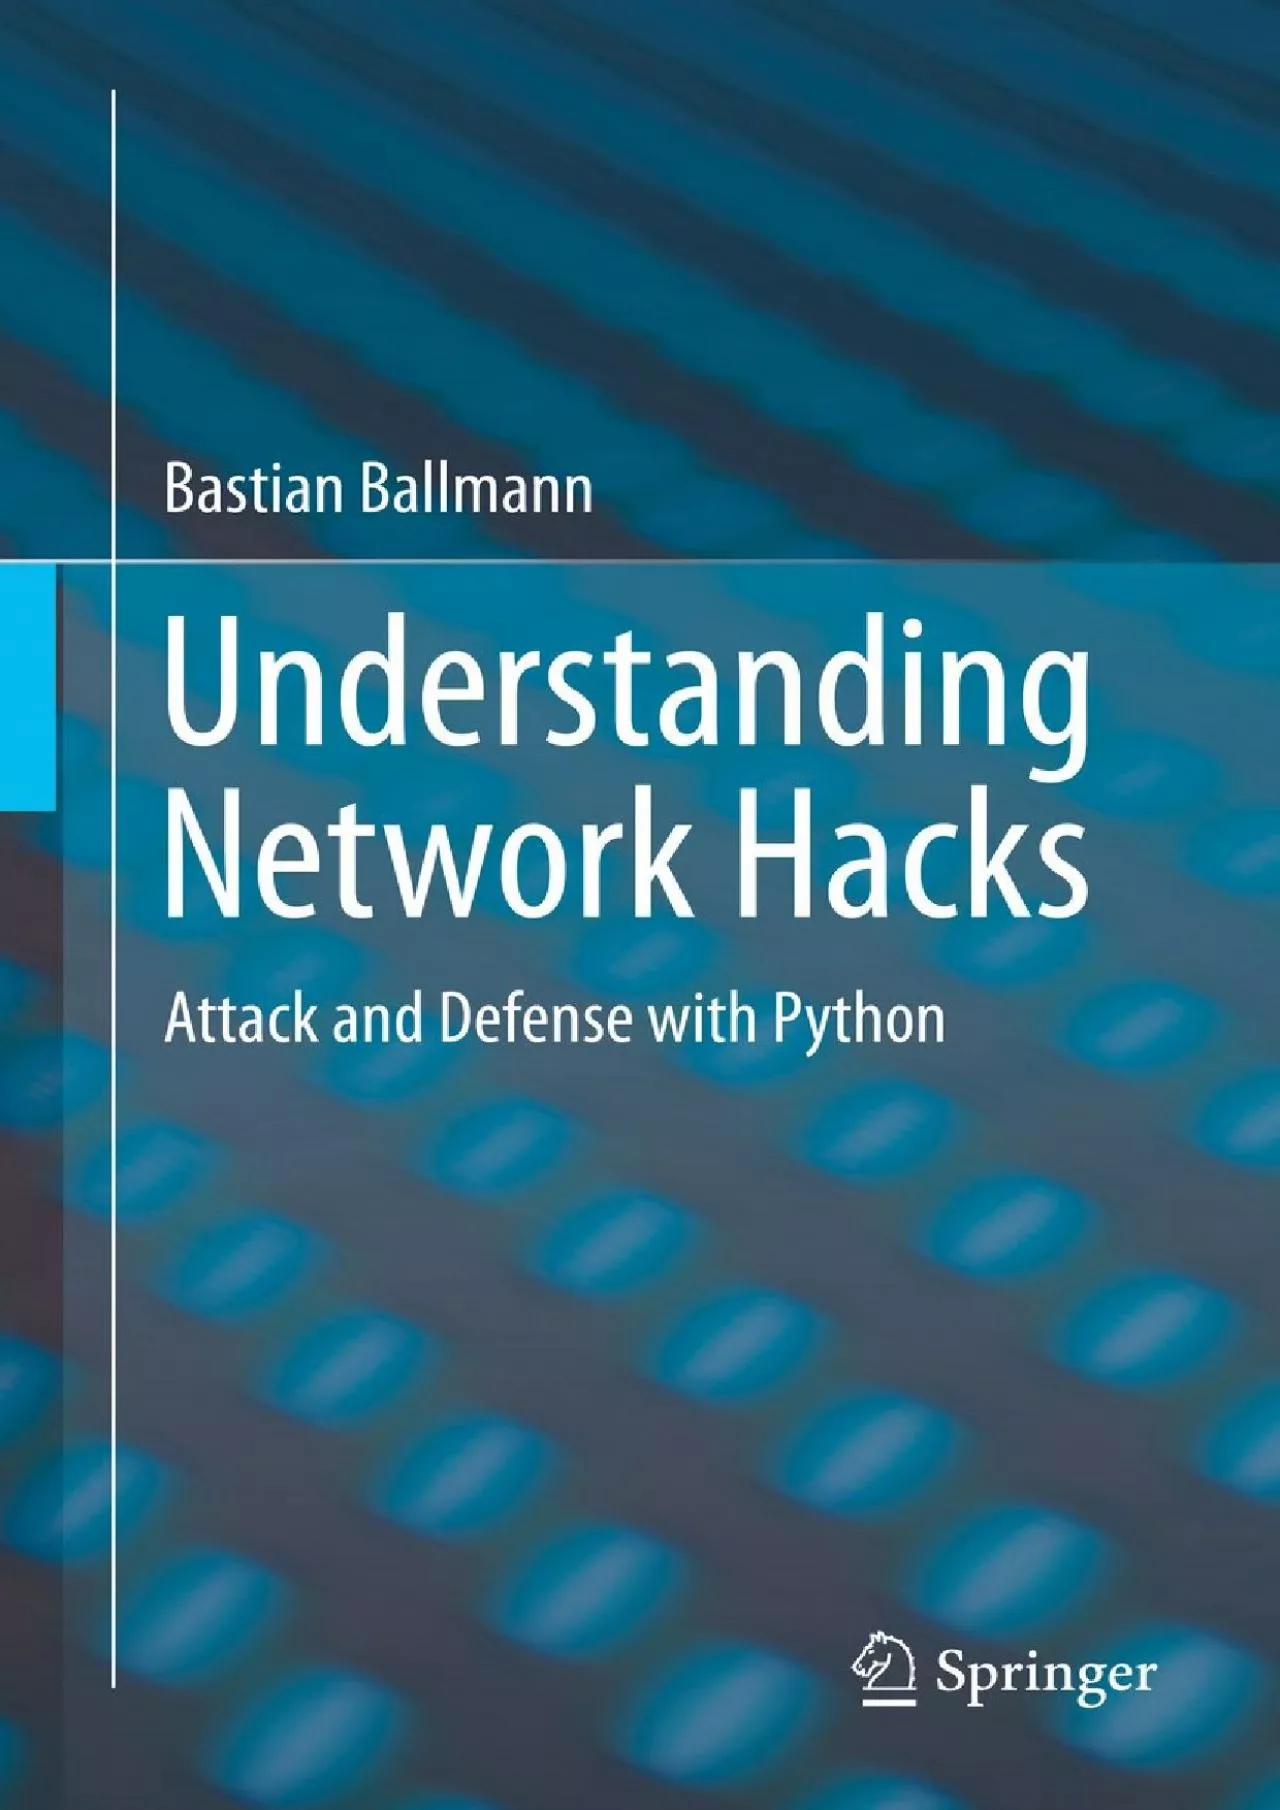 [eBOOK]-Understanding Network Hacks: Attack and Defense with Python